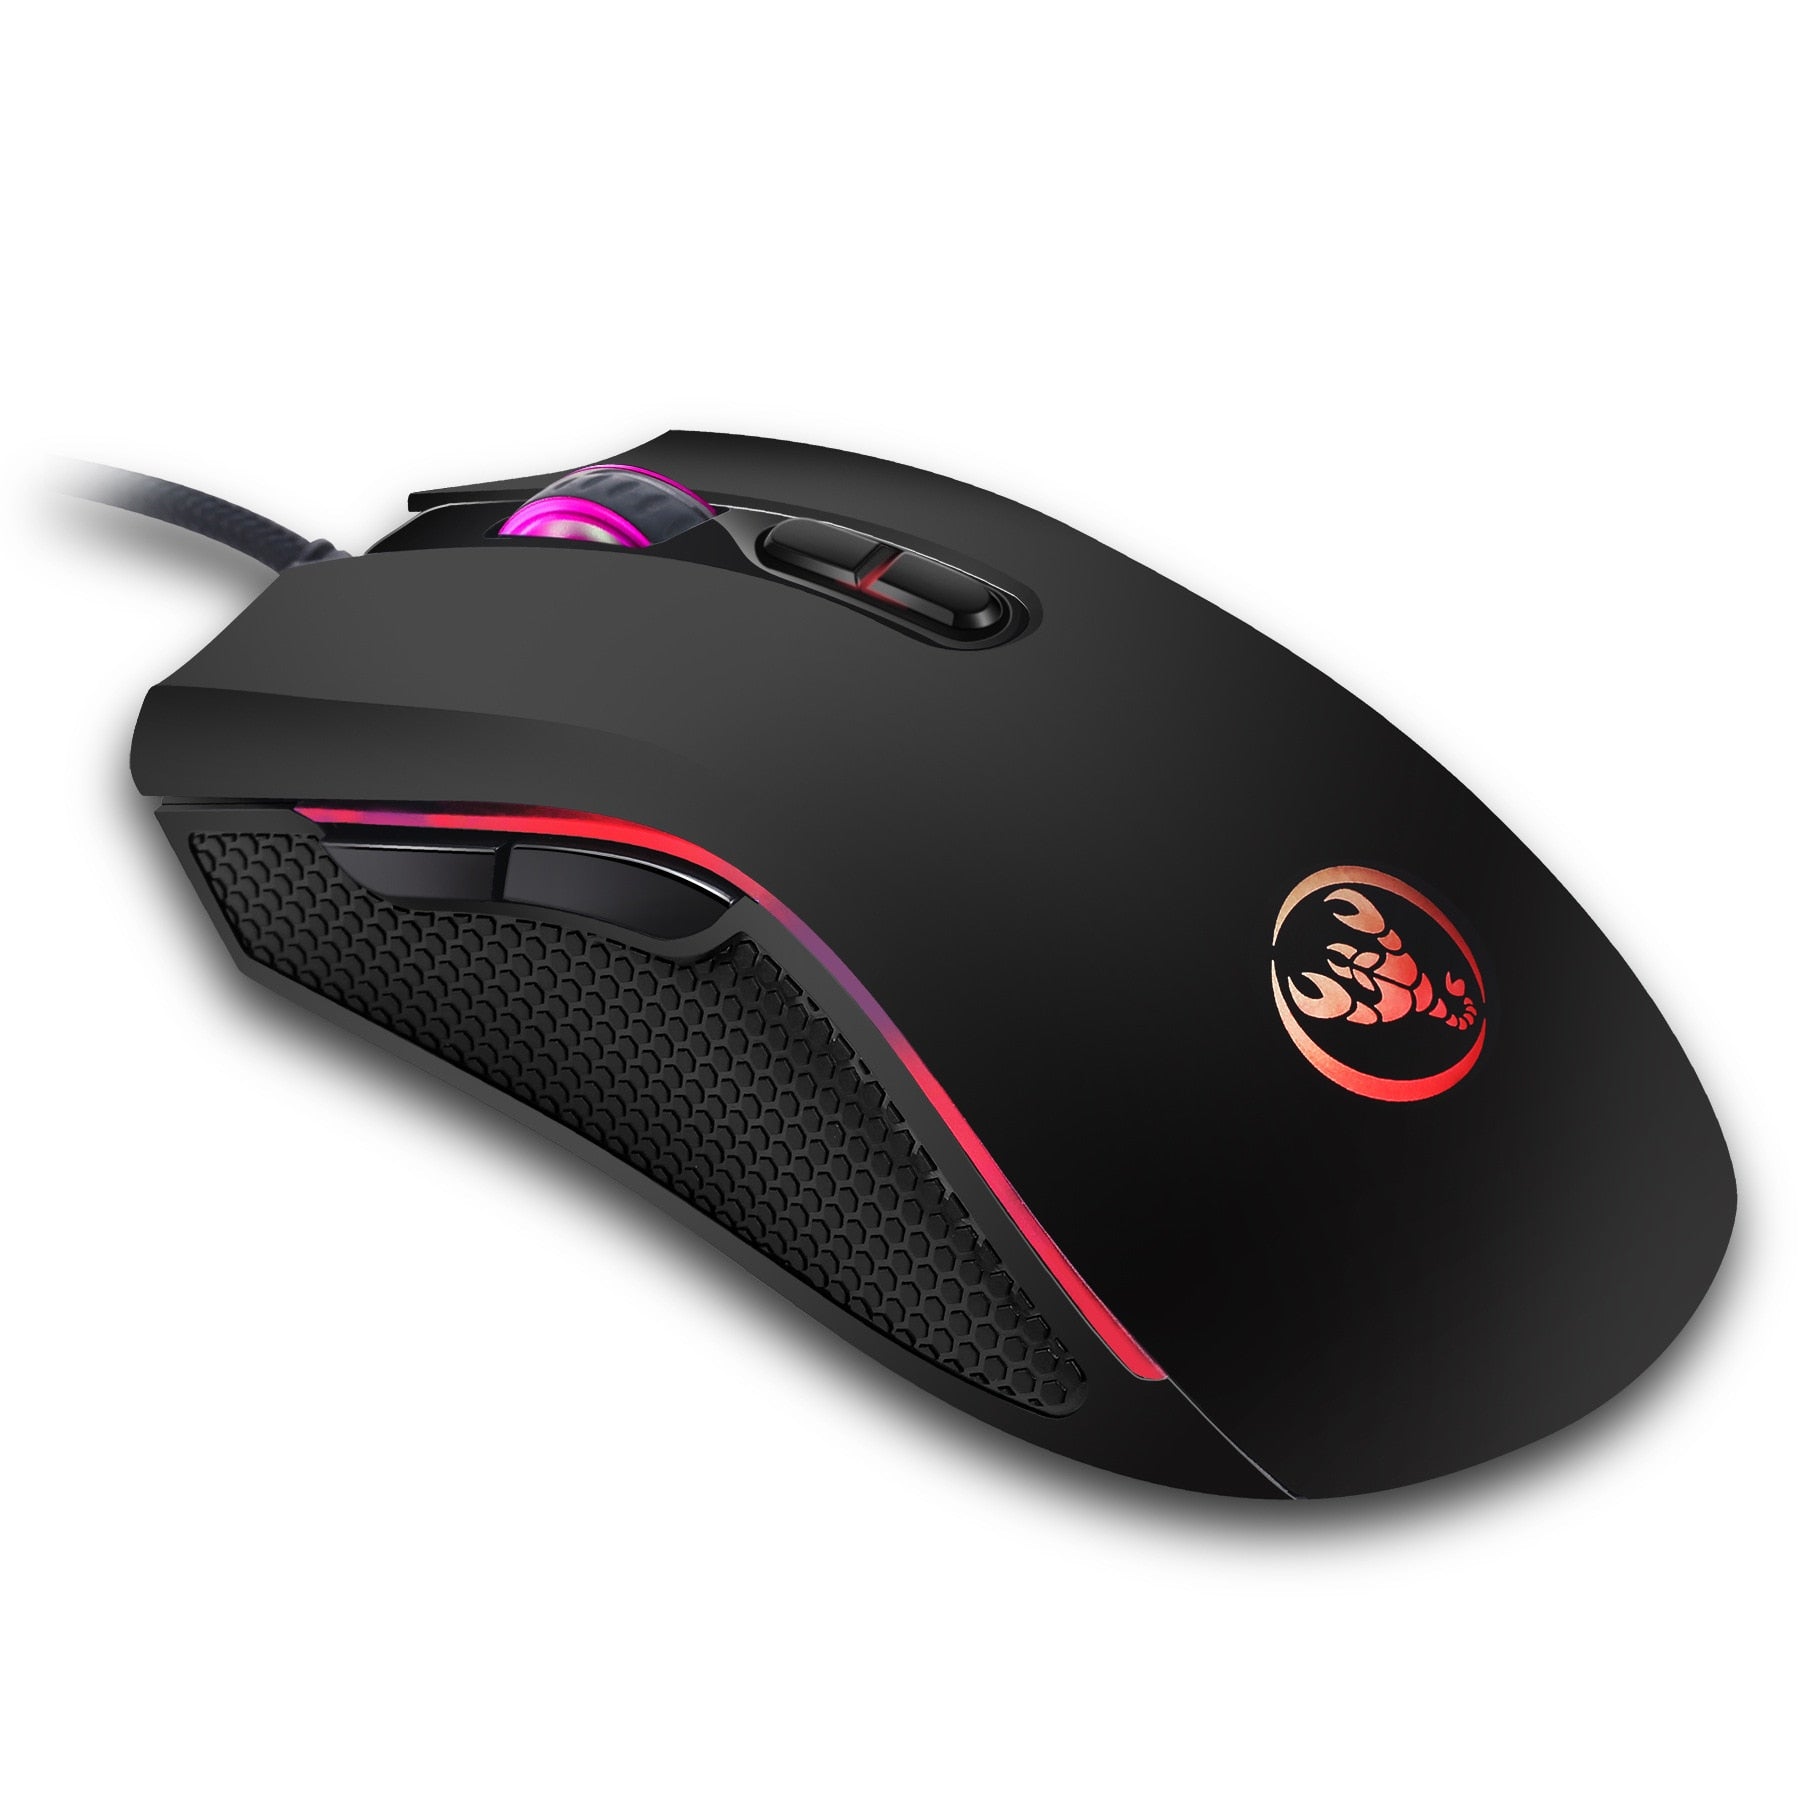 Hongsund brand High-end optical professional gaming mouse with 7 bright colors LED